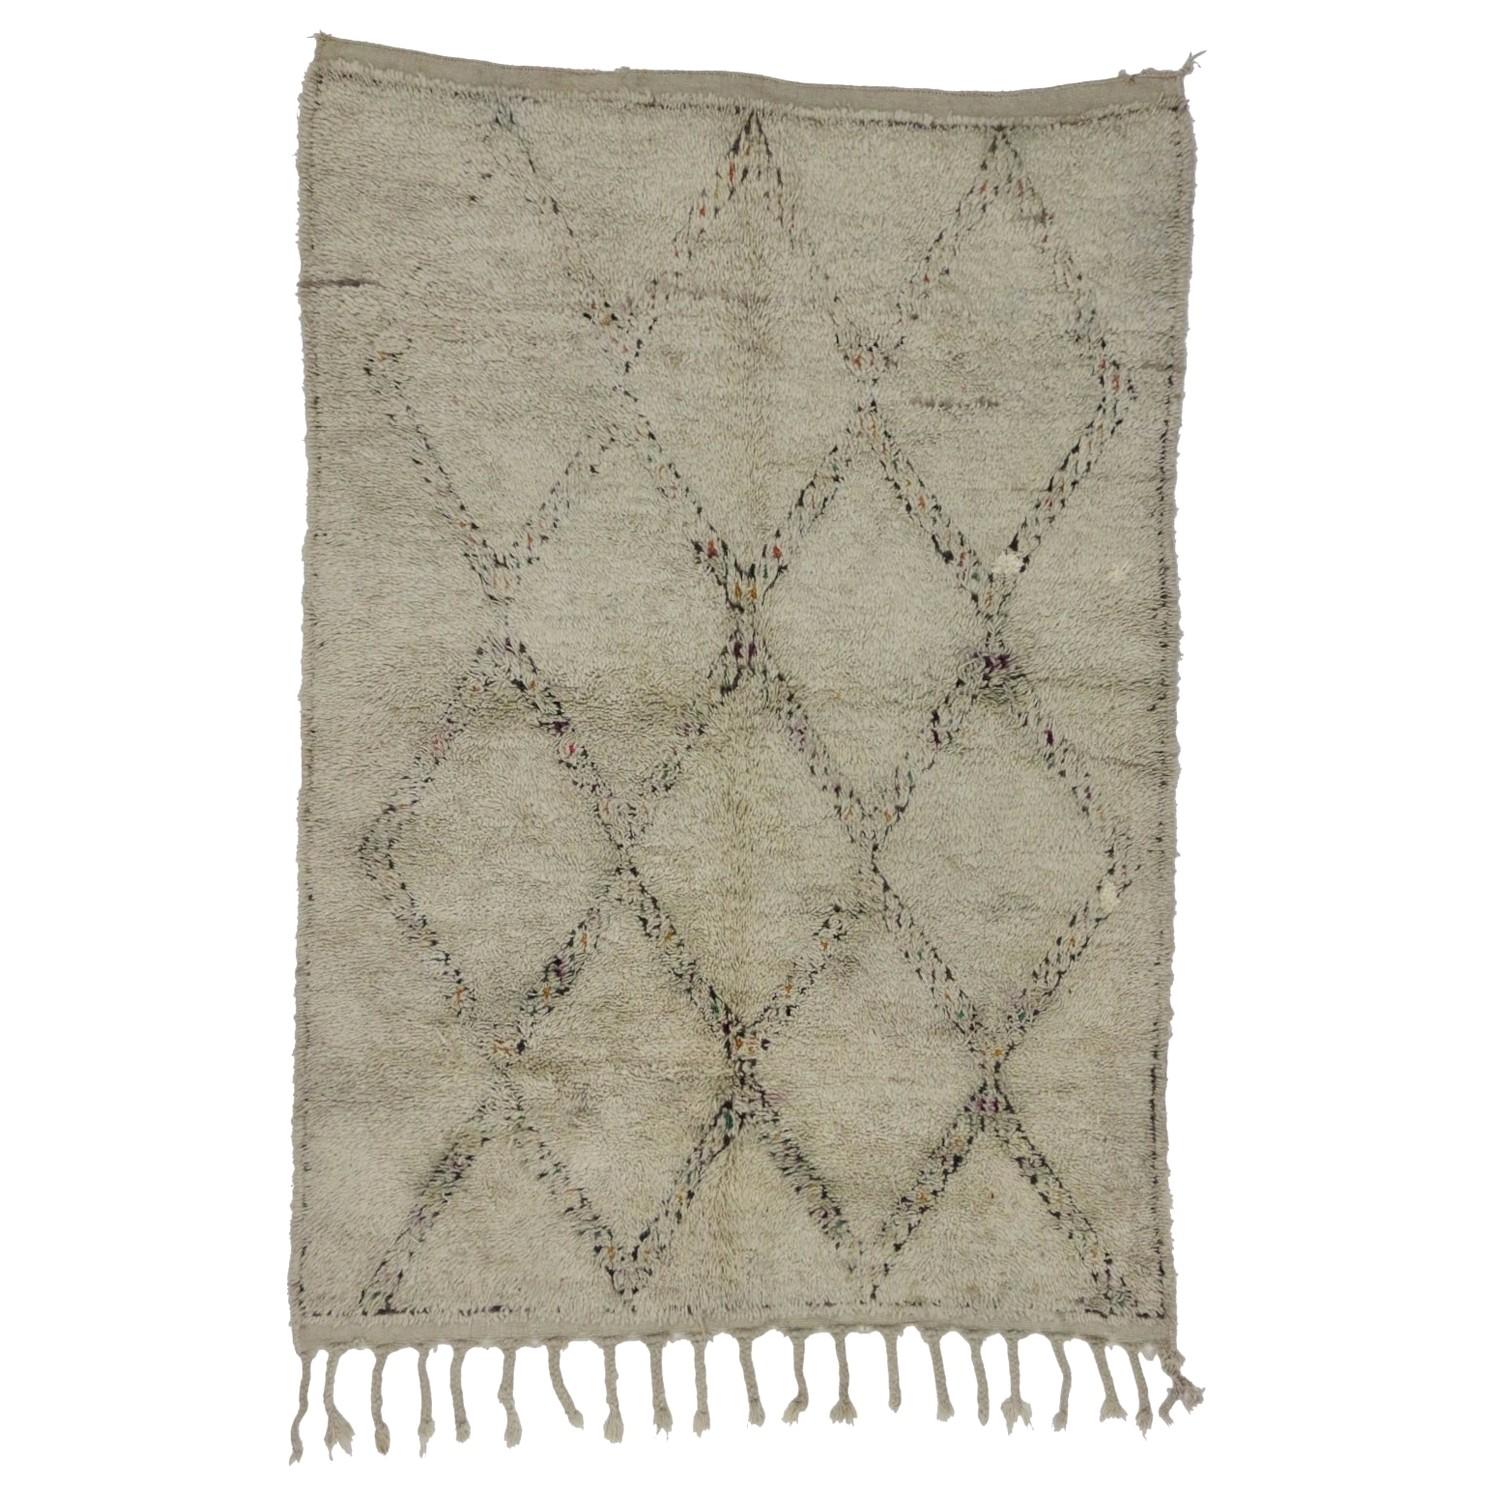 Vintage Berber Moroccan Rug with Hygge Style